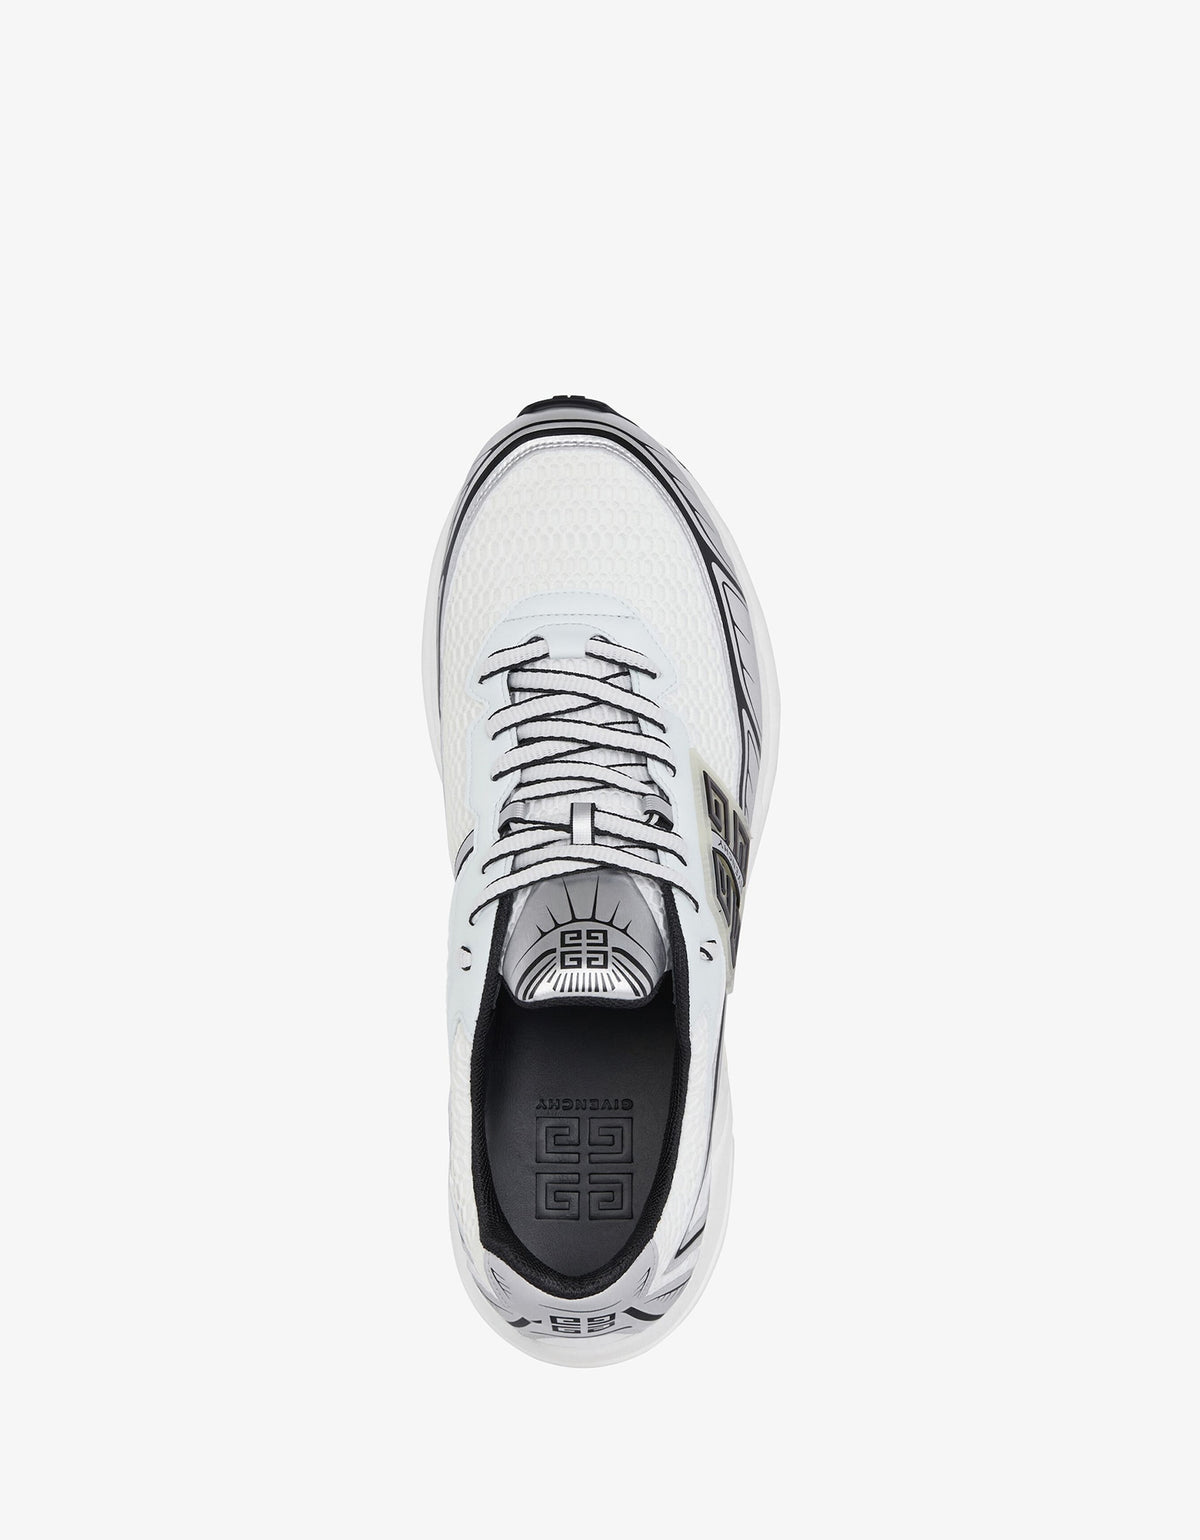 Givenchy White and Silver NFNTY-52 Runners